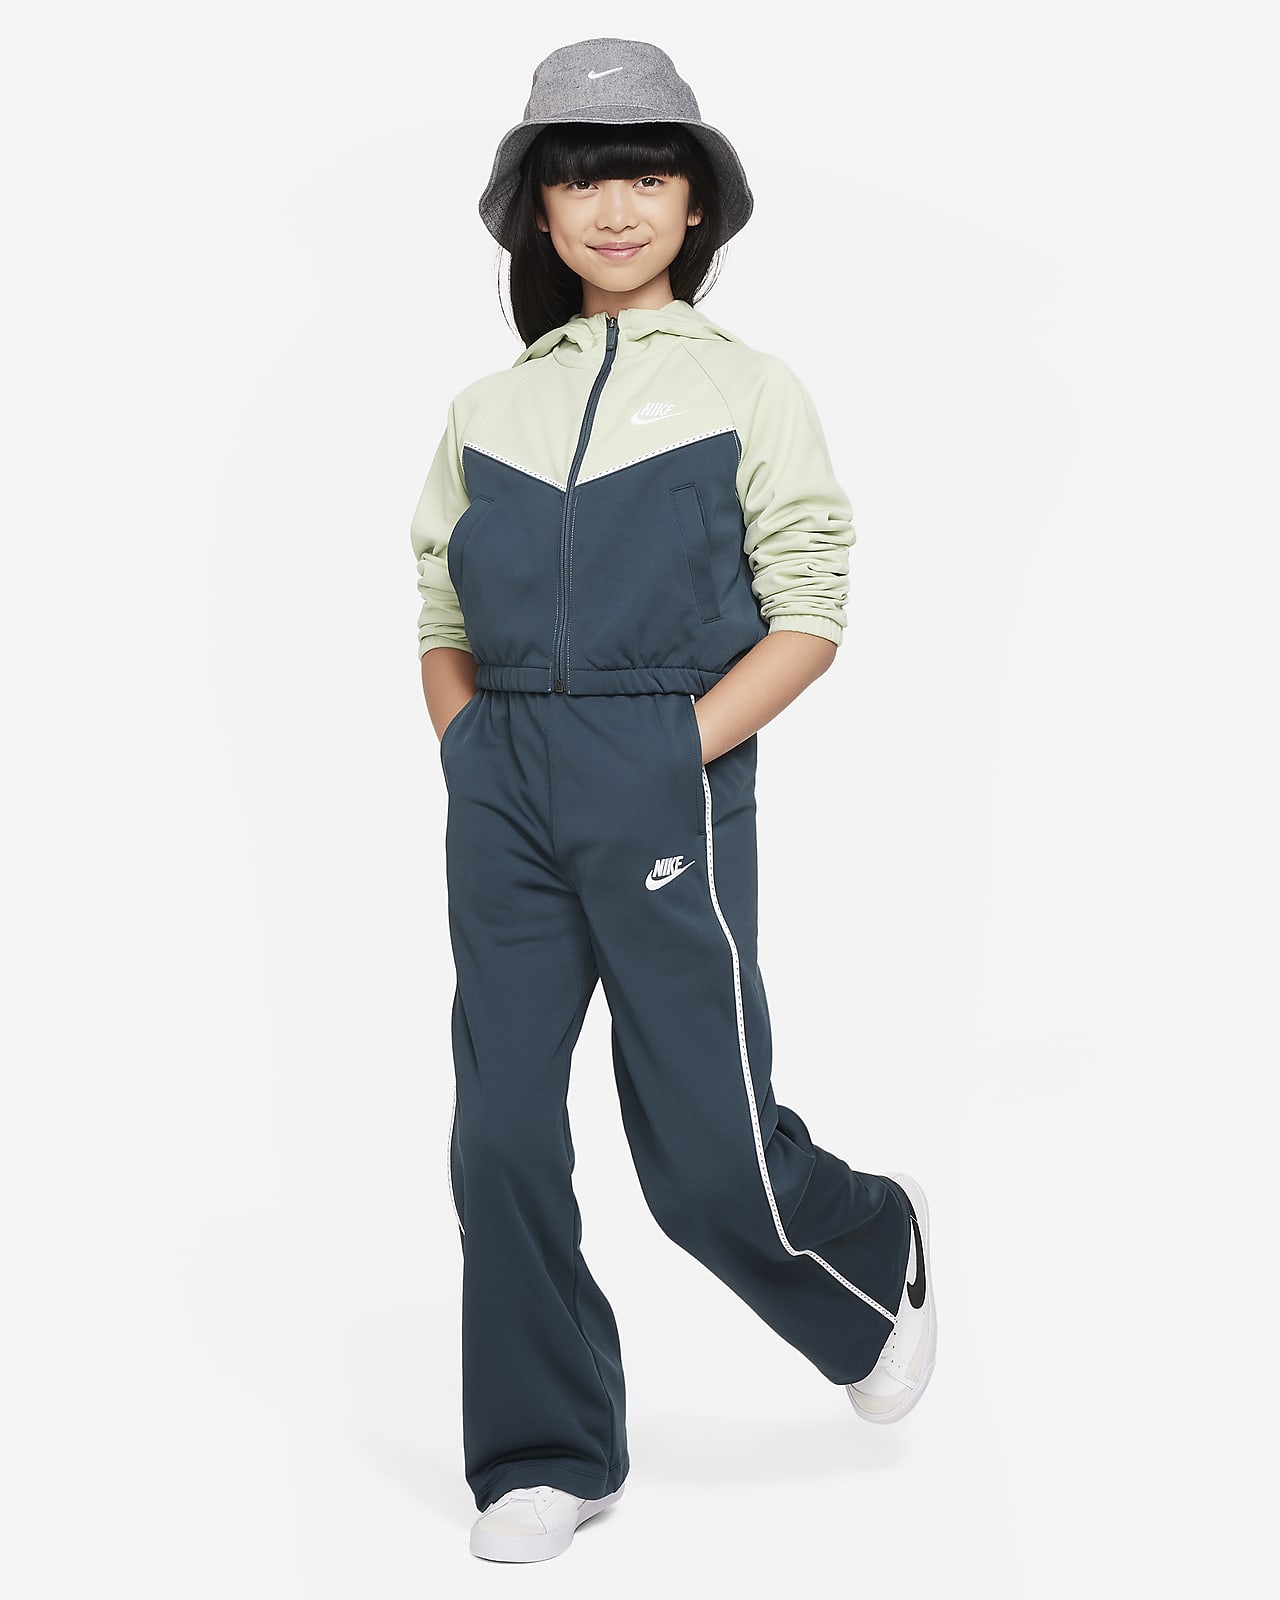 https://static.nike.com/a/images/t_PDP_1280_v1/f_auto,q_auto:eco/196a3bcd-cc04-4832-9301-045eea1663a4/sportswear-older-tracksuit-tnwNH2.png